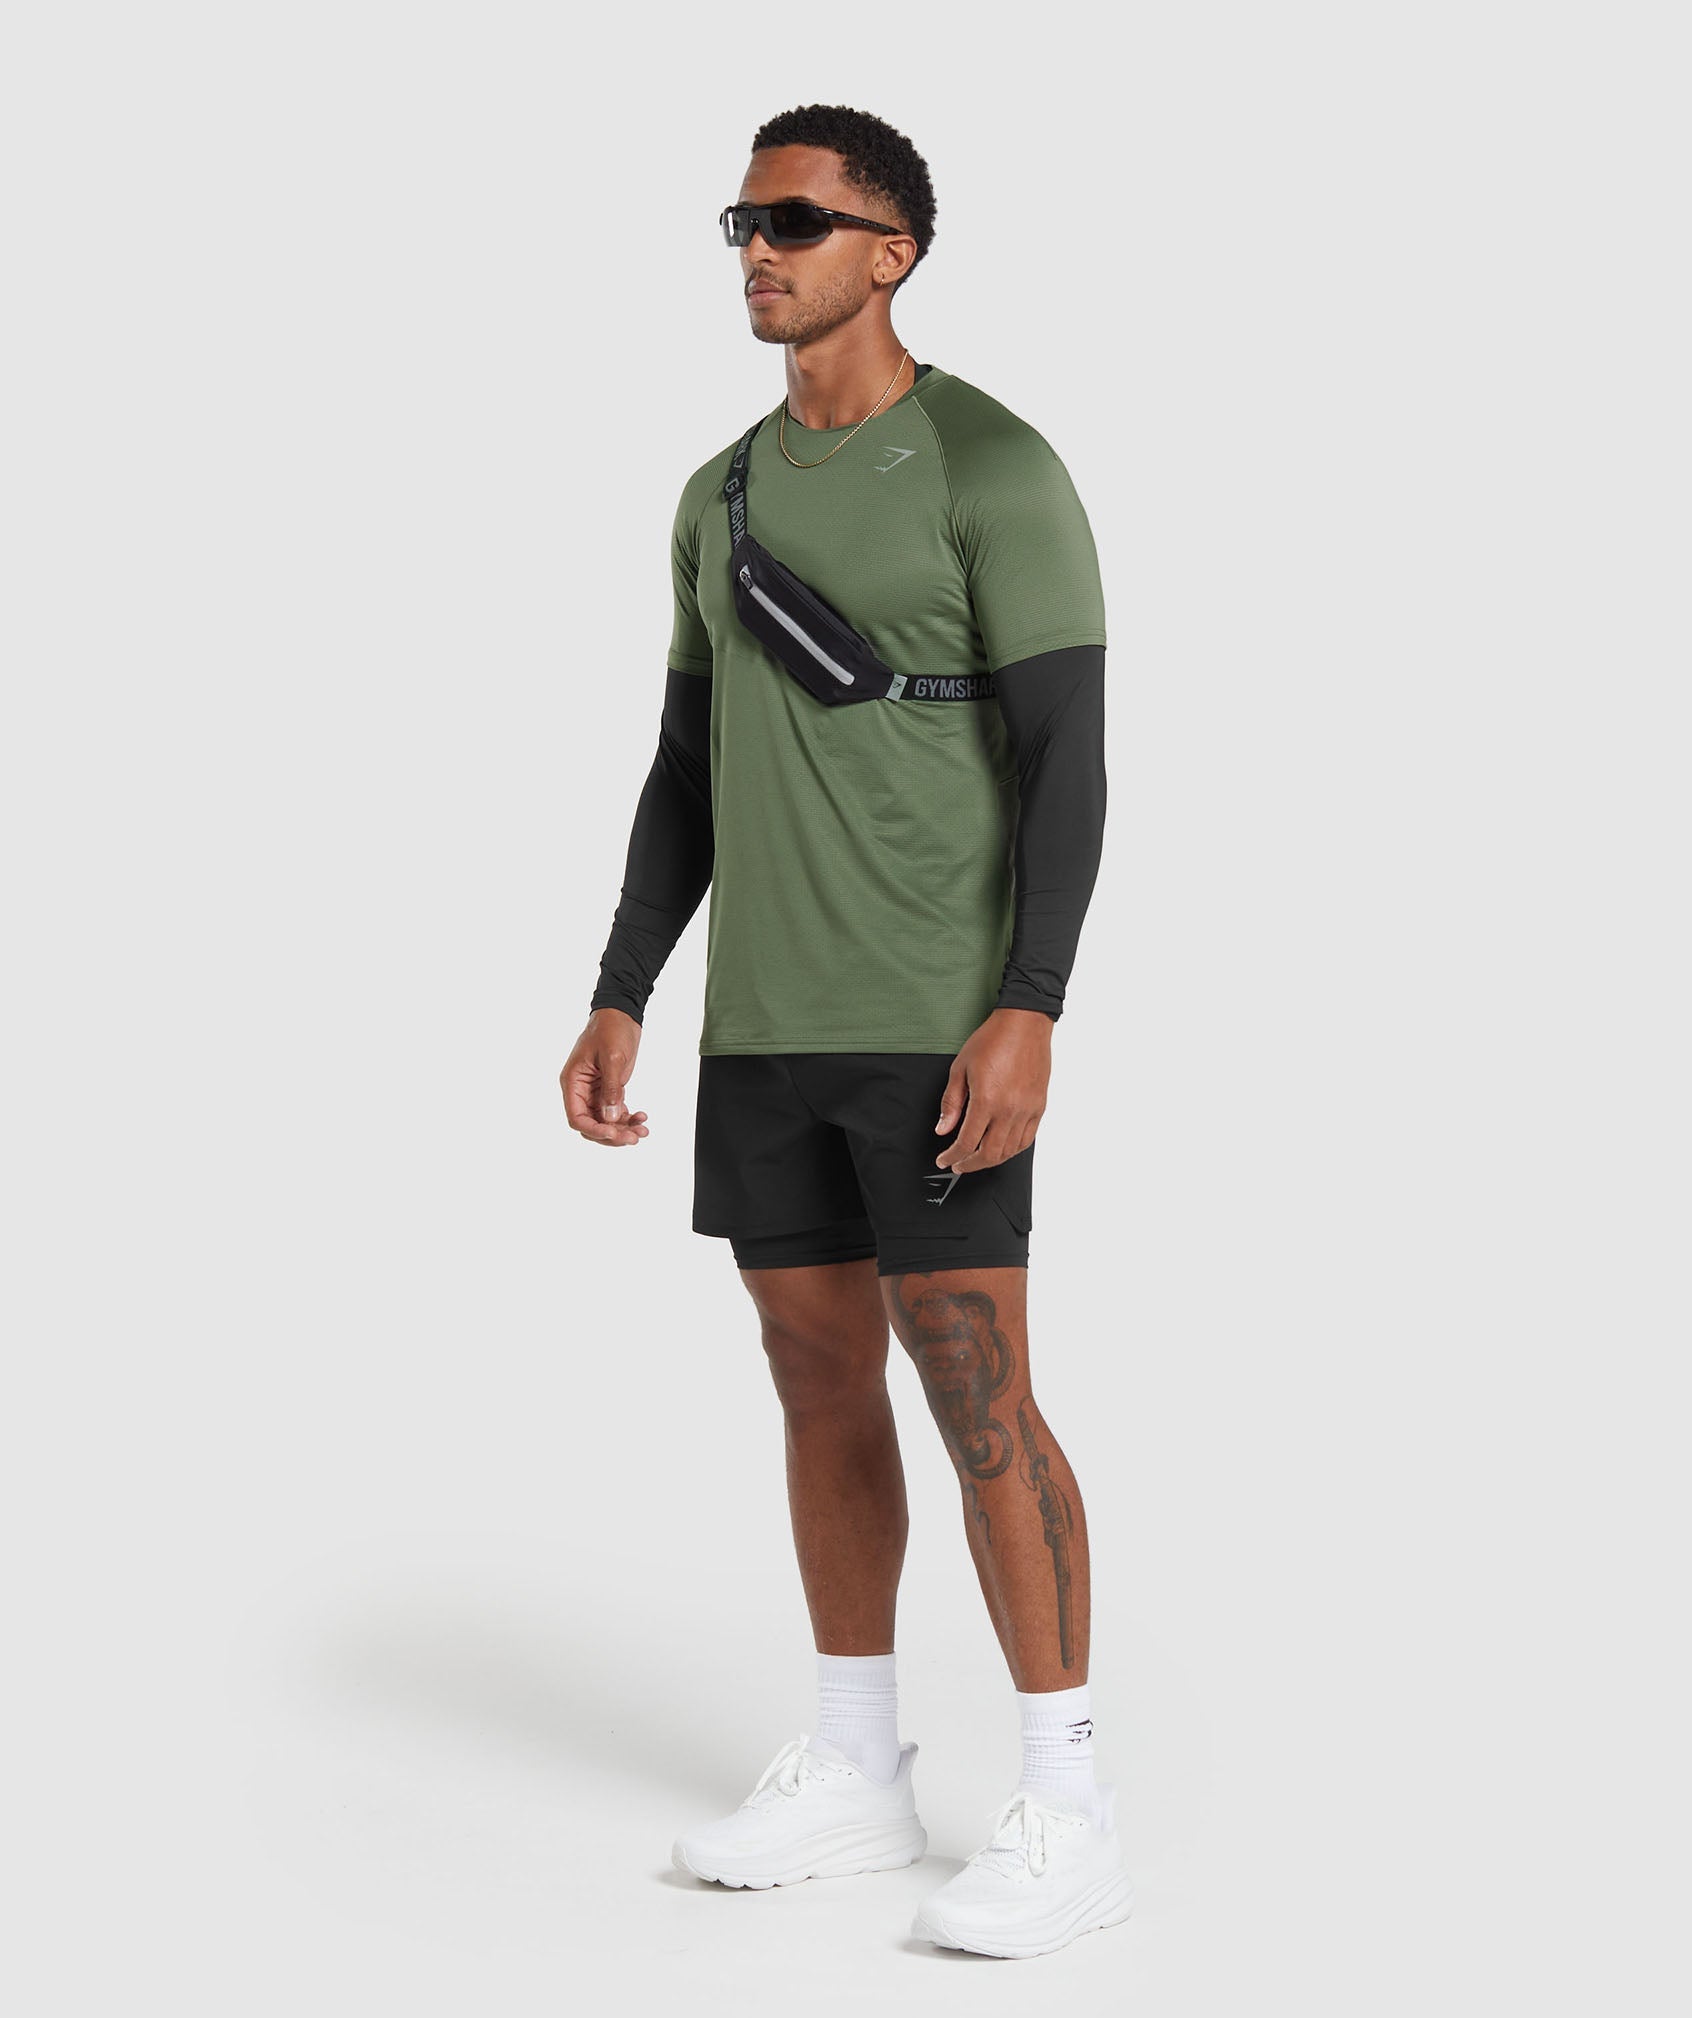 Speed T-Shirt in Core Olive - view 6